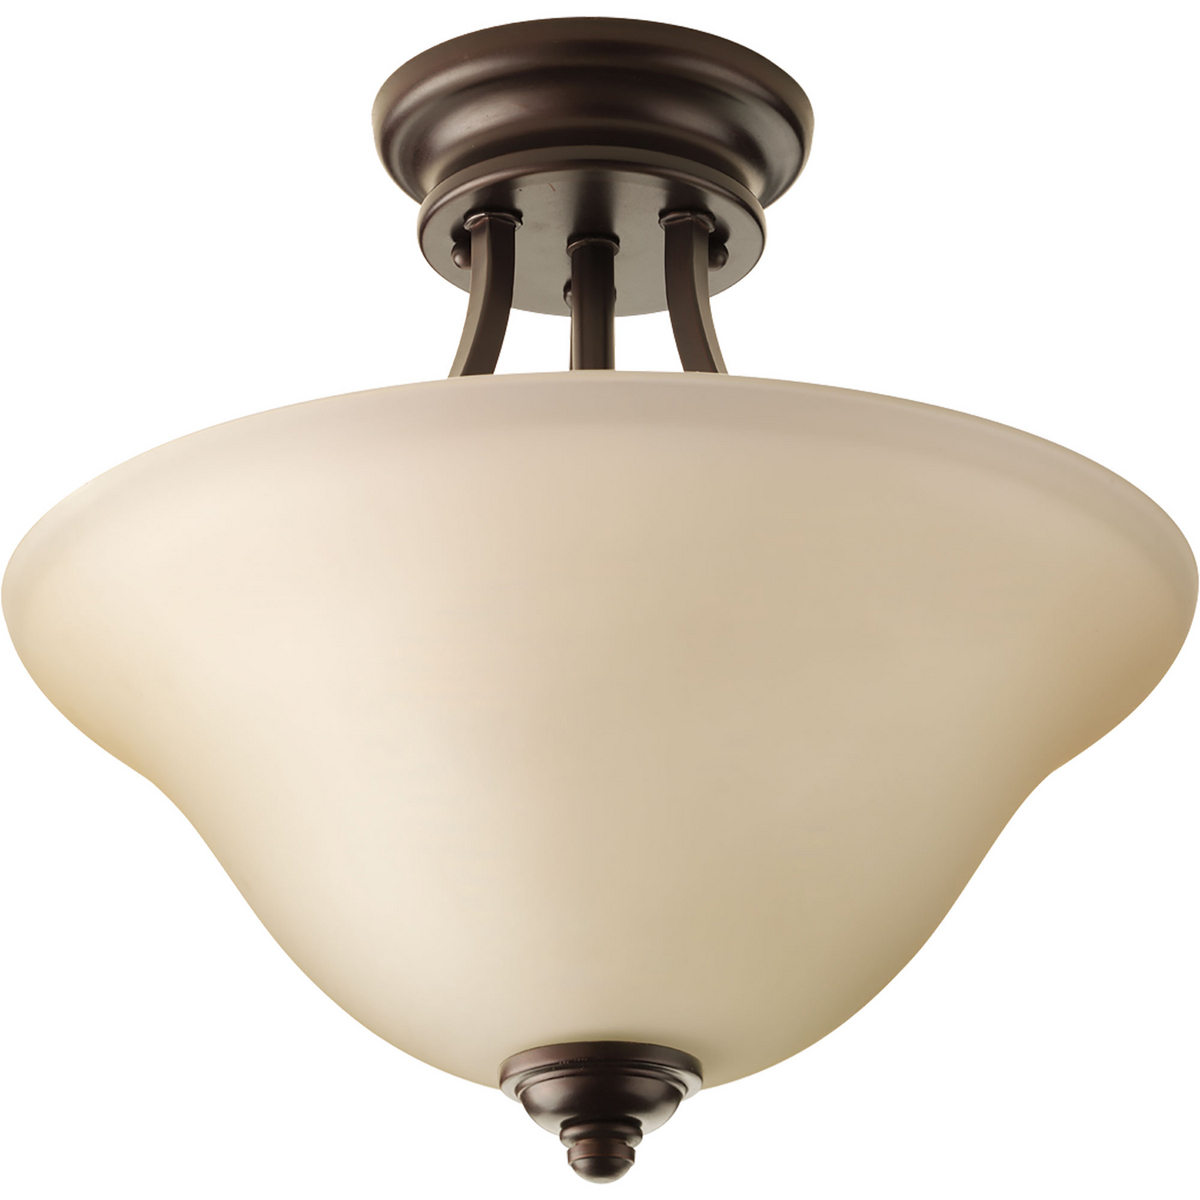 The spirit of craftsmanship prevails with subtle forms. Light umber etched glass shade. Two-Light semi flush mount..